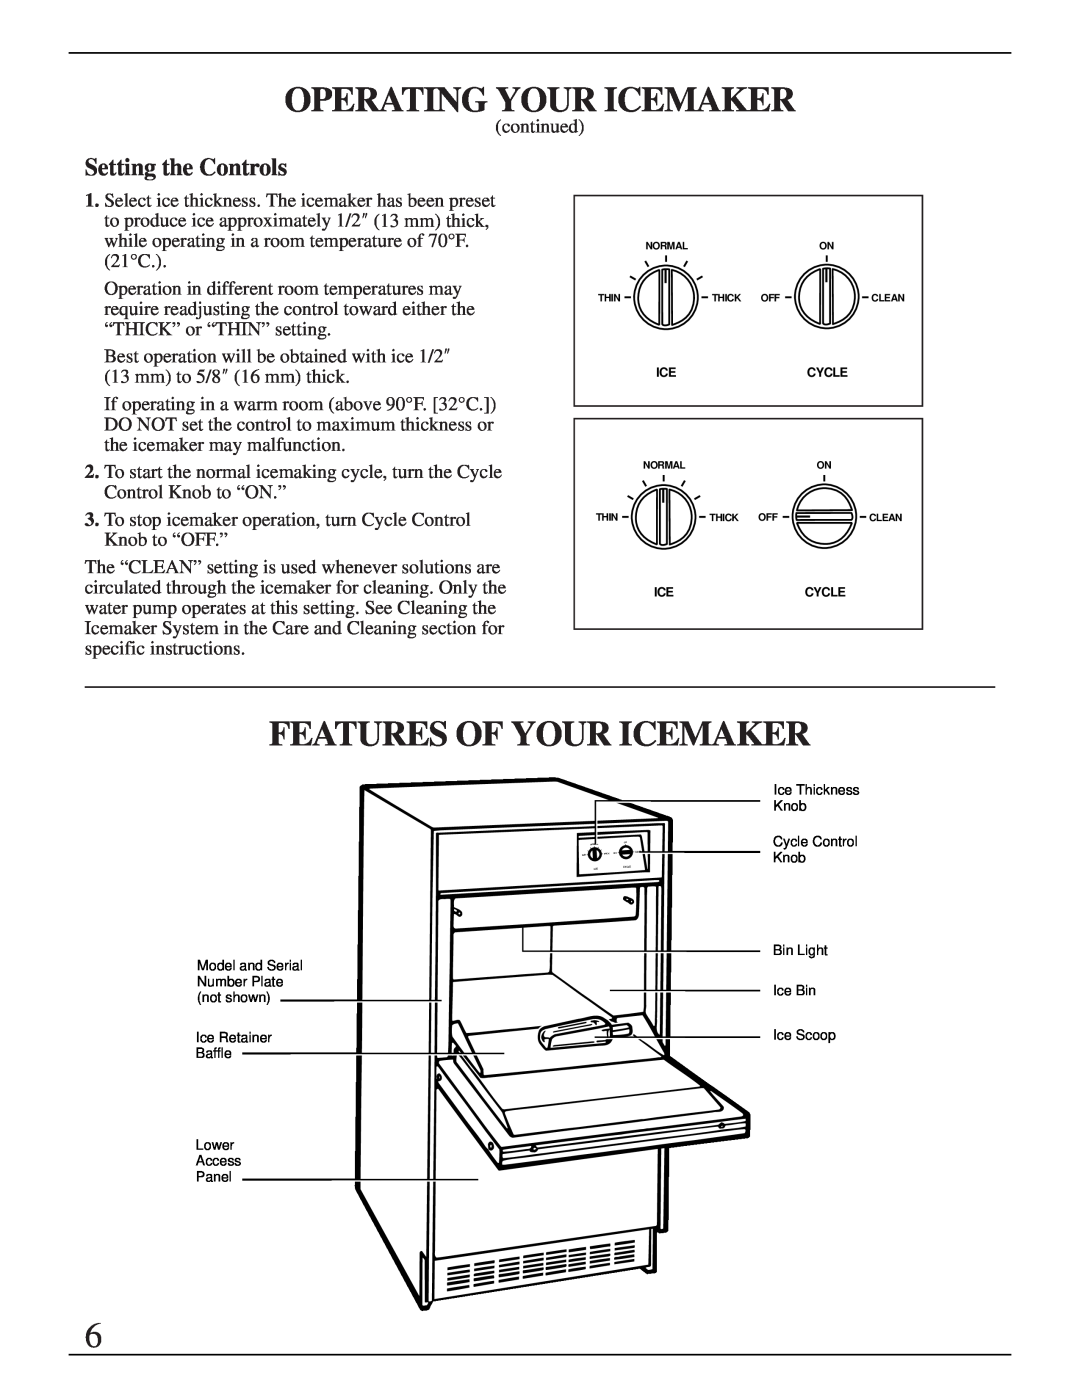 GE Monogram ZDIB50 installation instructions Features Of Your Icemaker, Setting the Controls, Operating Your Icemaker 